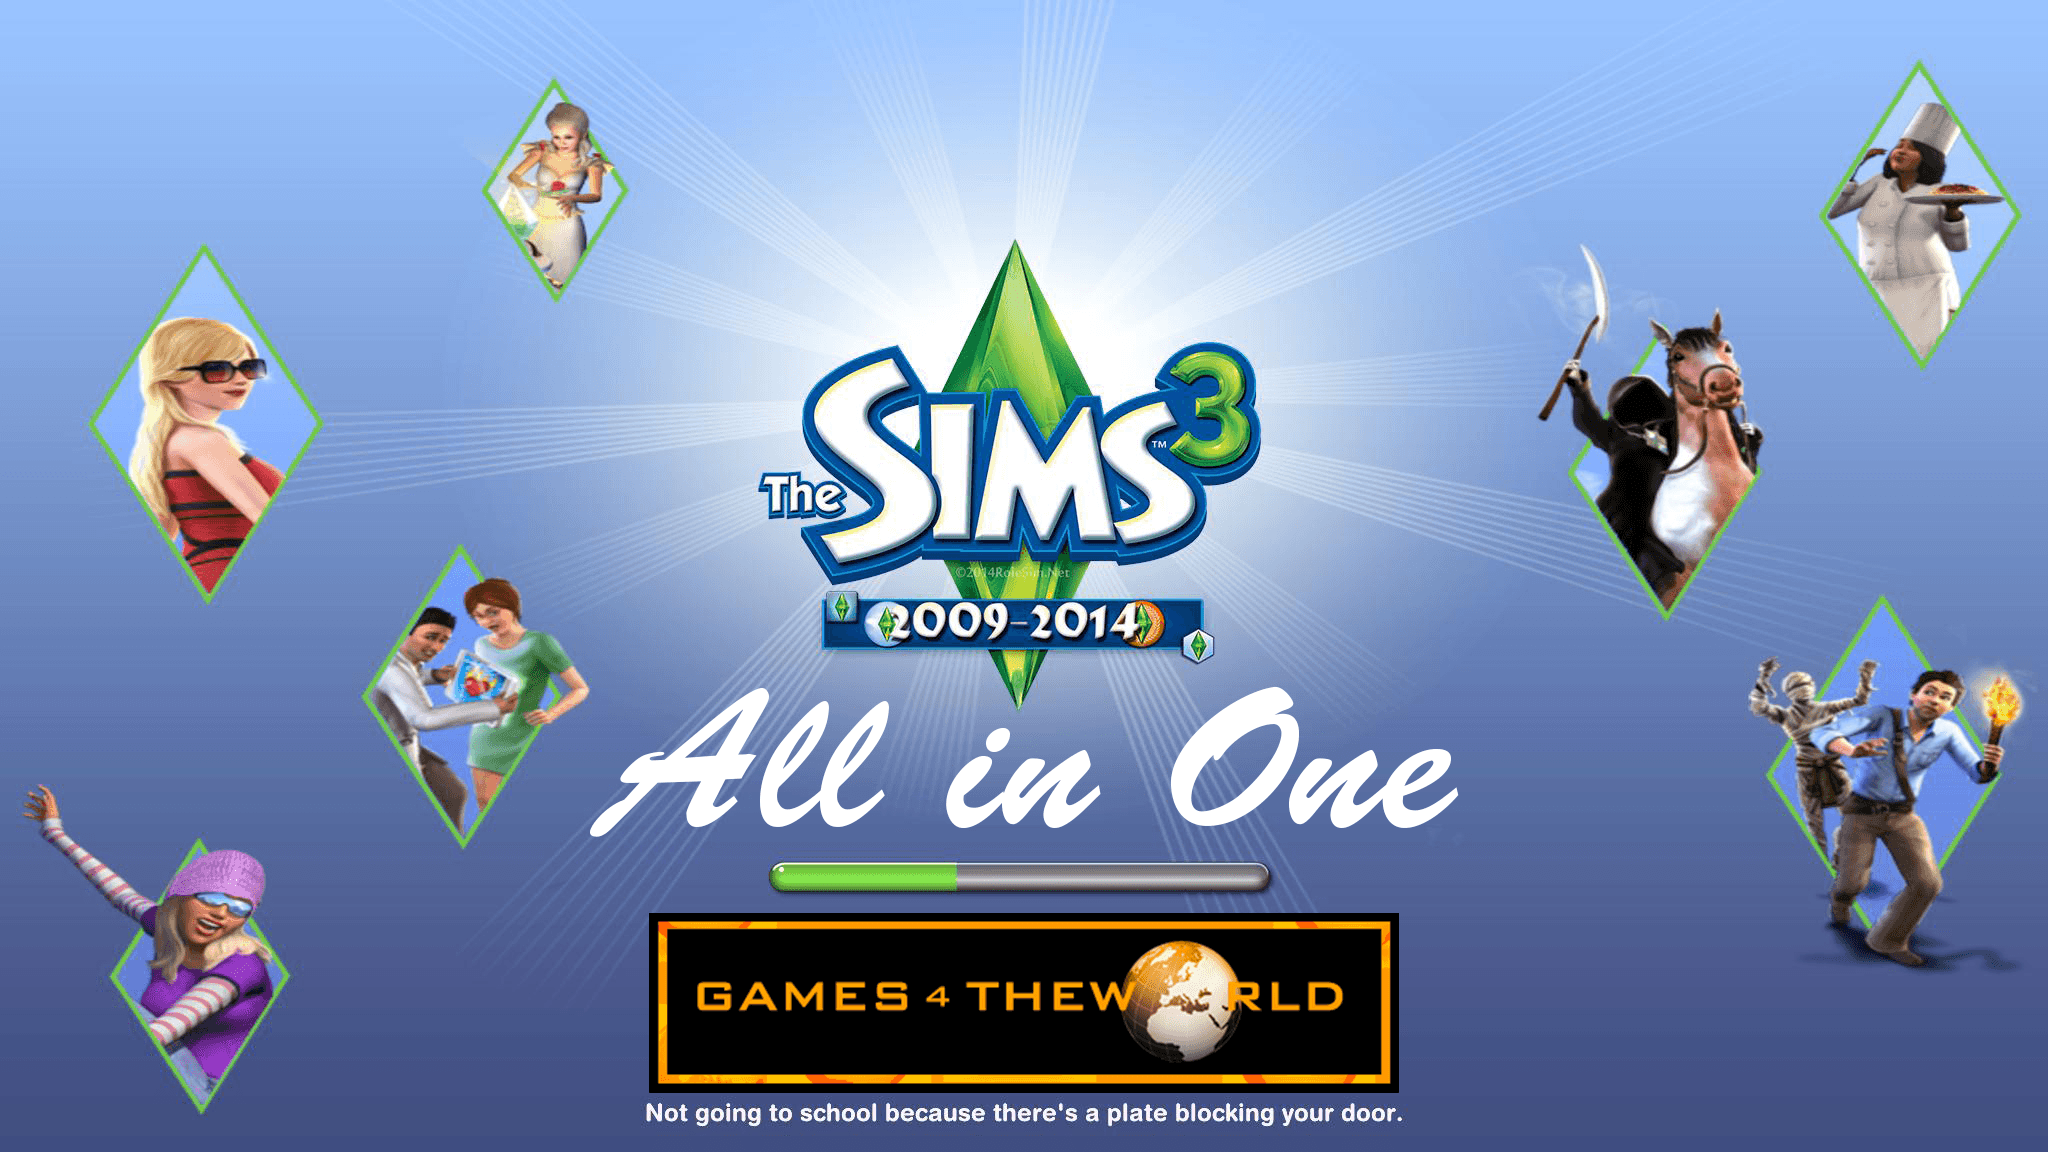 Sims 3 complete collection torrent